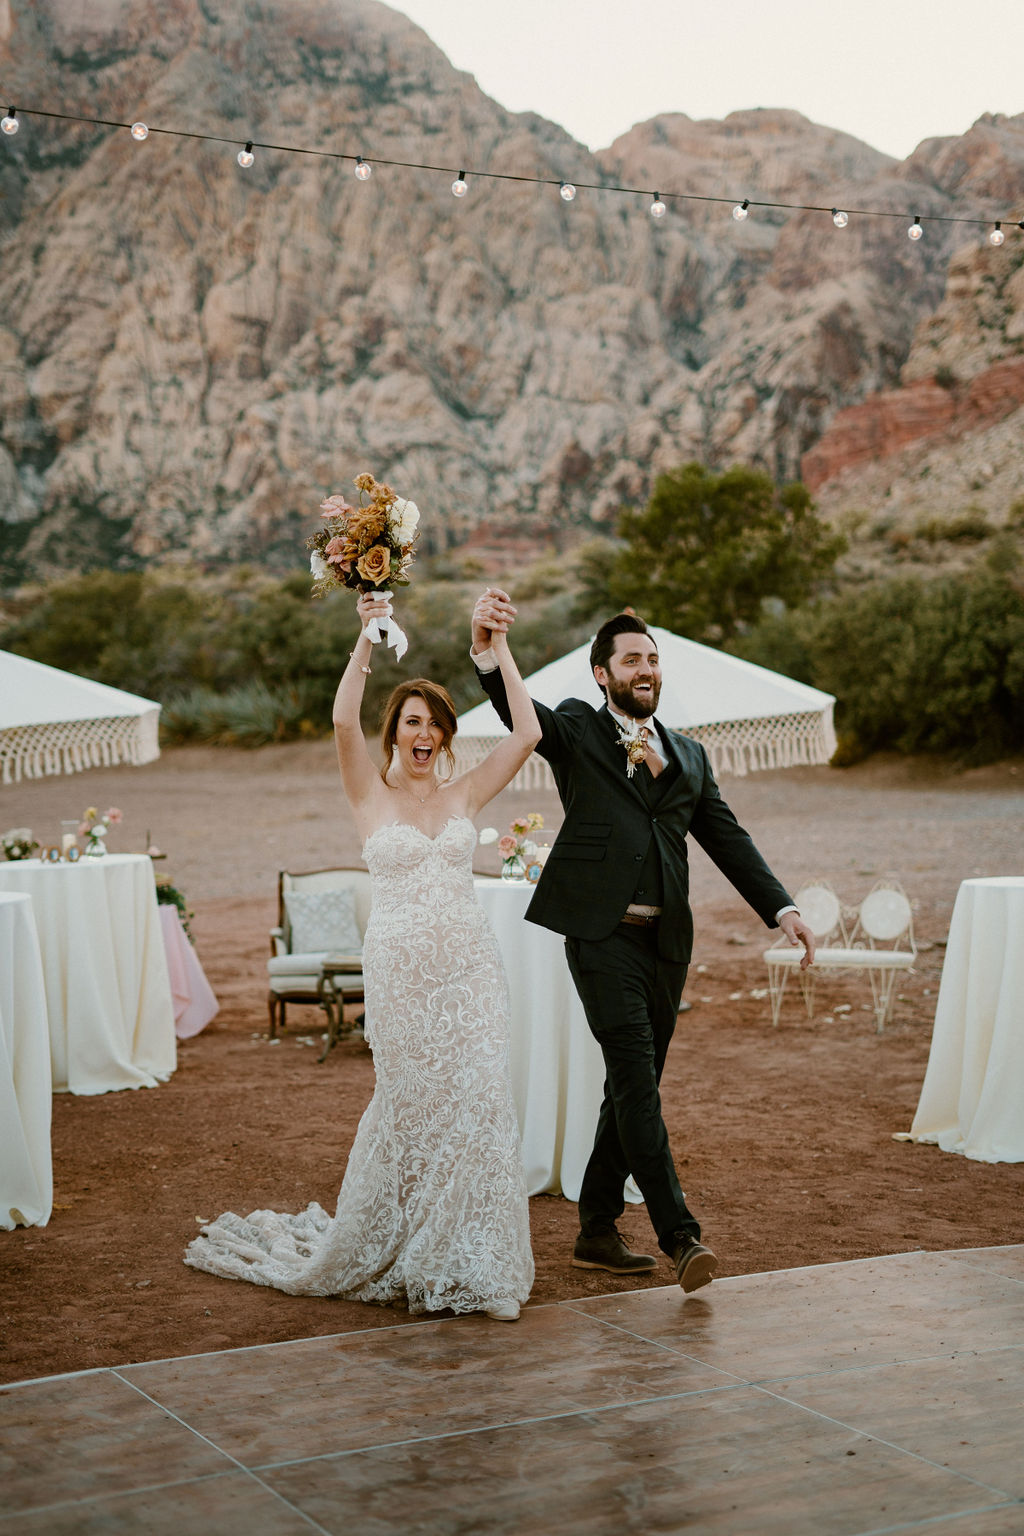 A bride and groom walk hand in hand at an outdoor wedding reception with tables, decorative umbrellas, and string lights, with a dramatic mountain backdrop at Red Rock Canyon